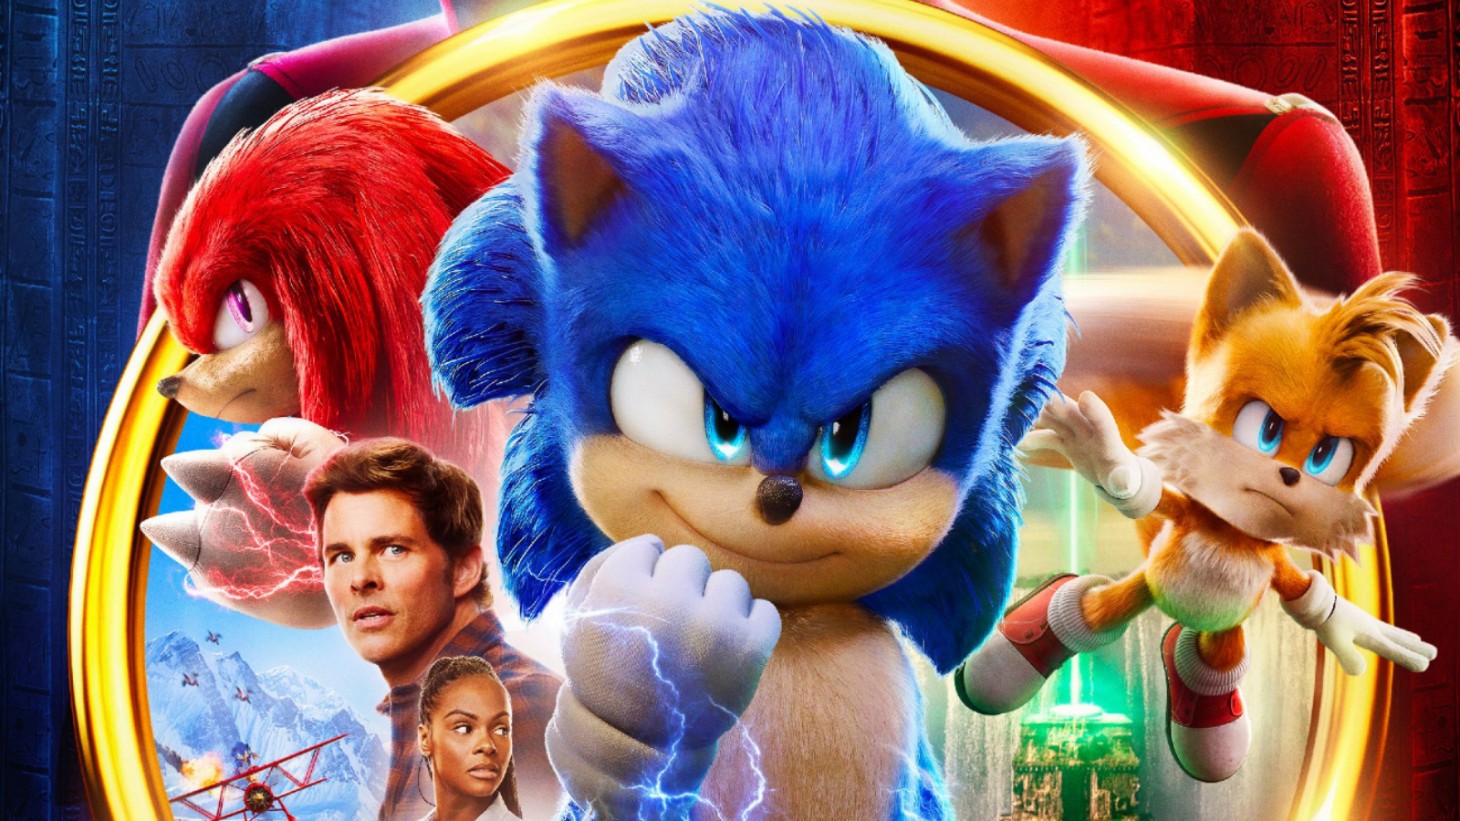 Sonic the Hedgehog 2: The Movie